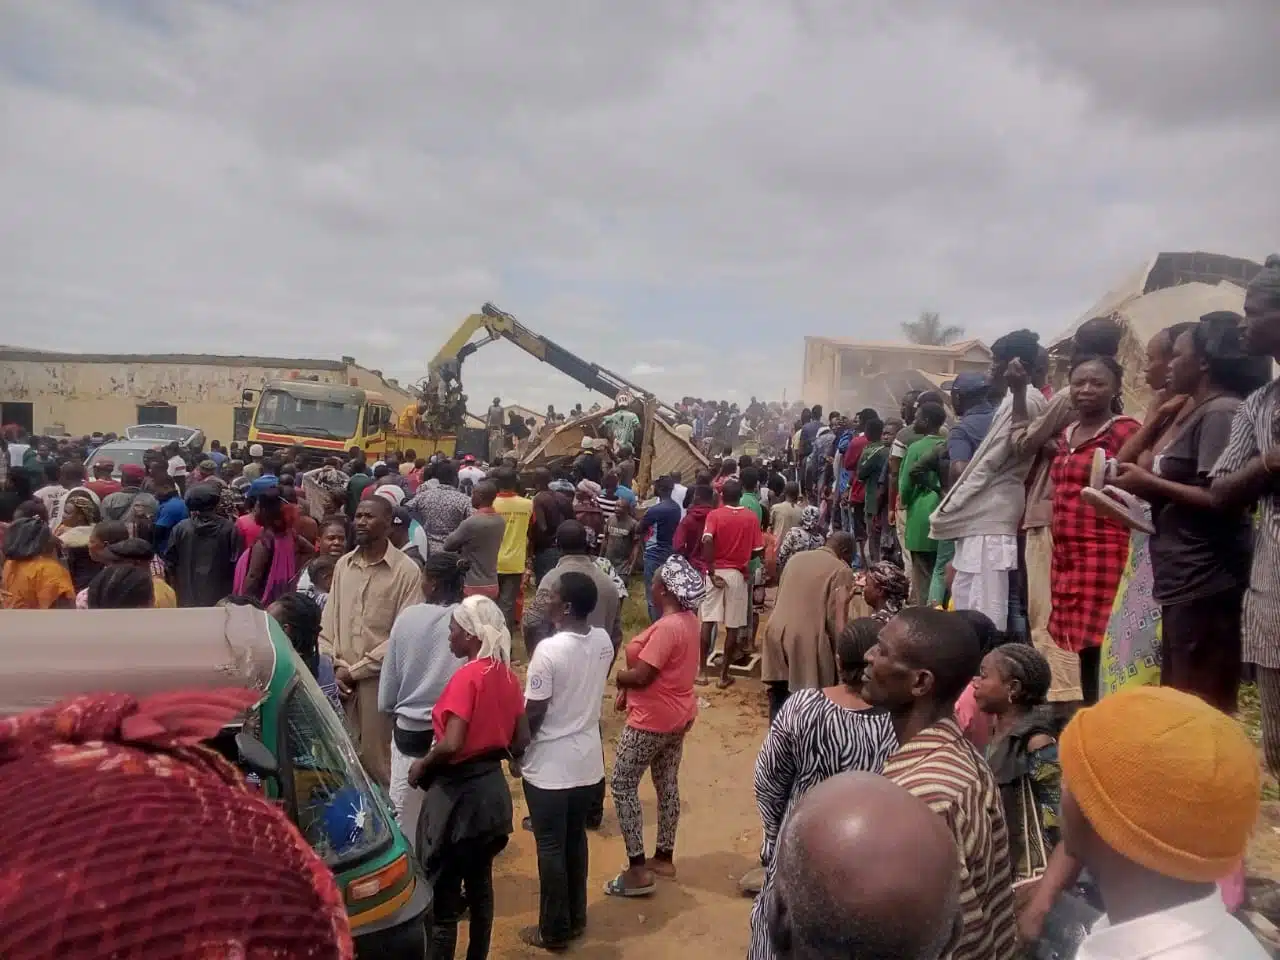 Tragedy in Jos as school buidling collapses on students writing exams